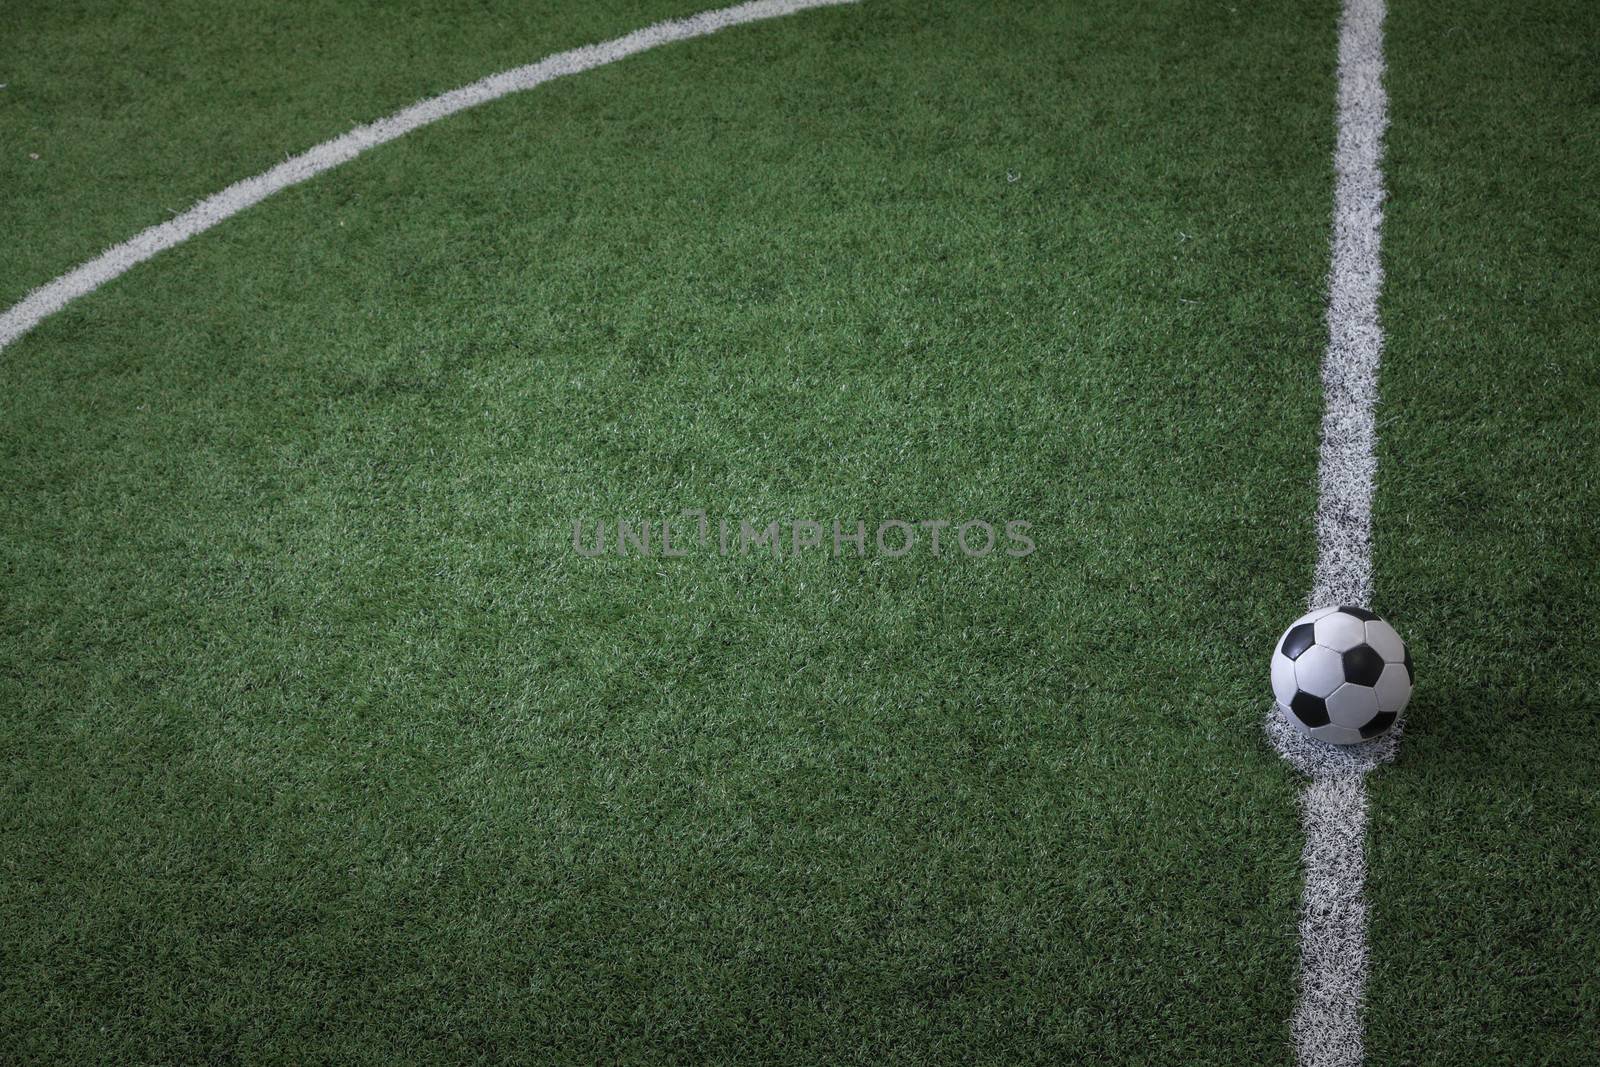 Soccer field with soccer ball on the line, high angle view